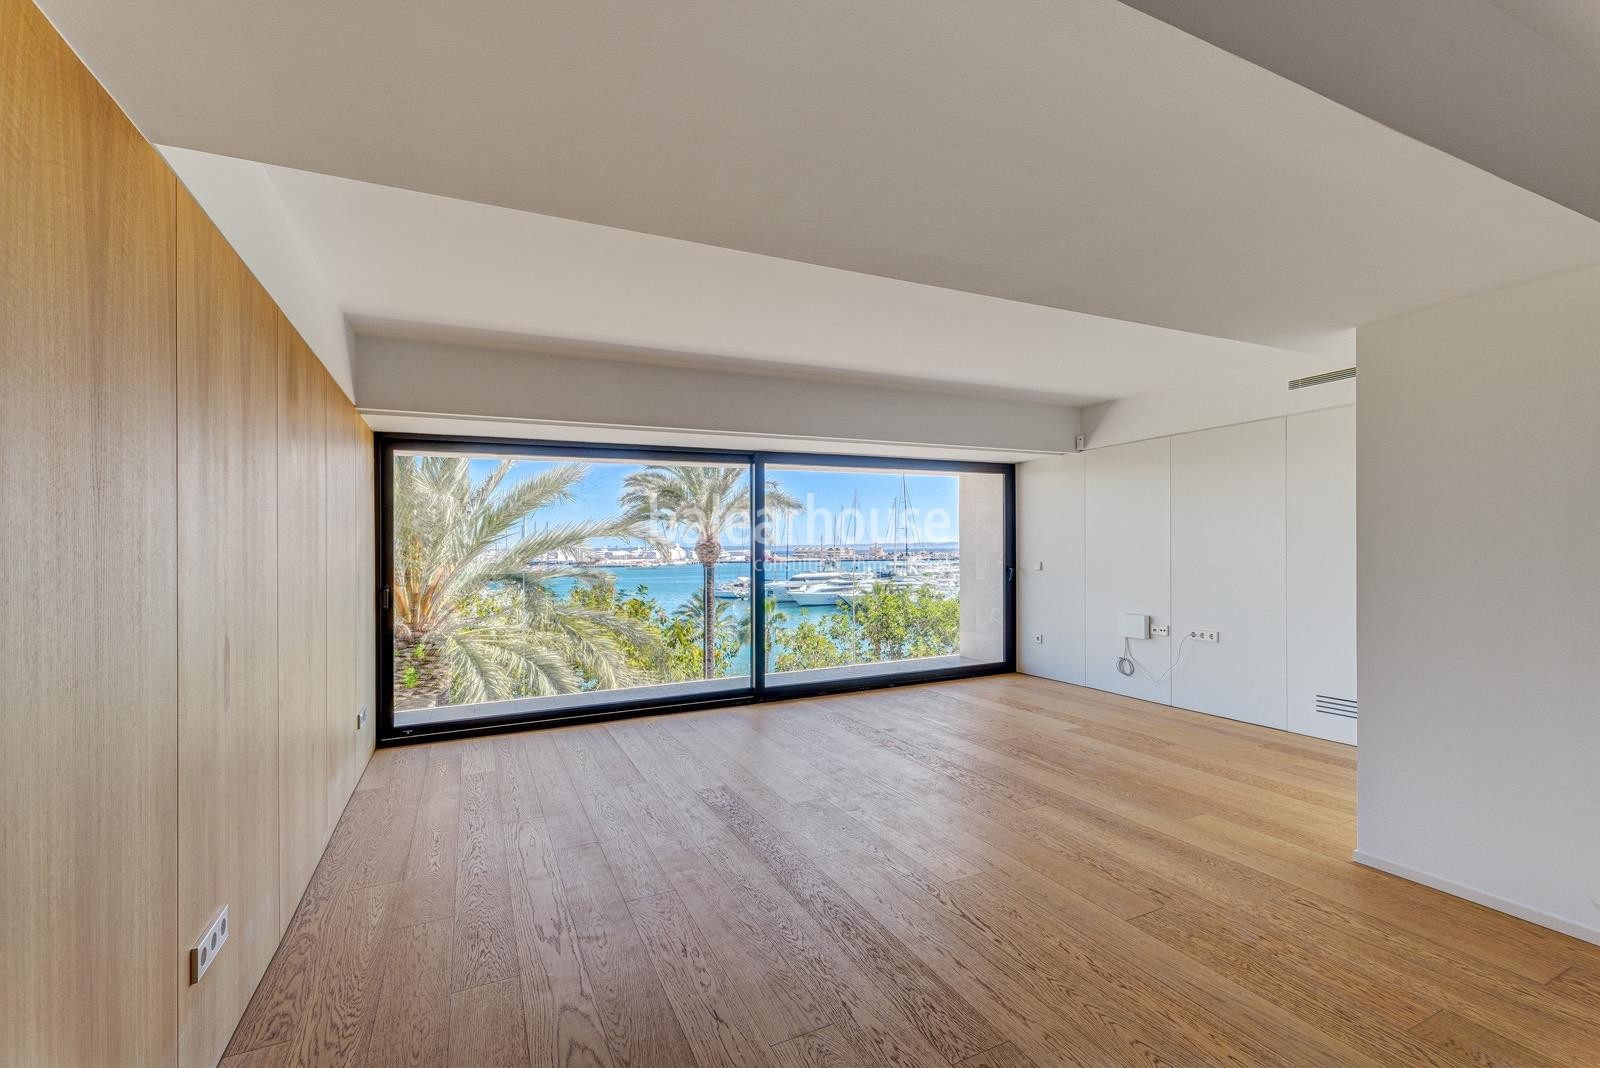 Exclusive new flats on the seafront of Palma where you can live the most contemporary luxury.